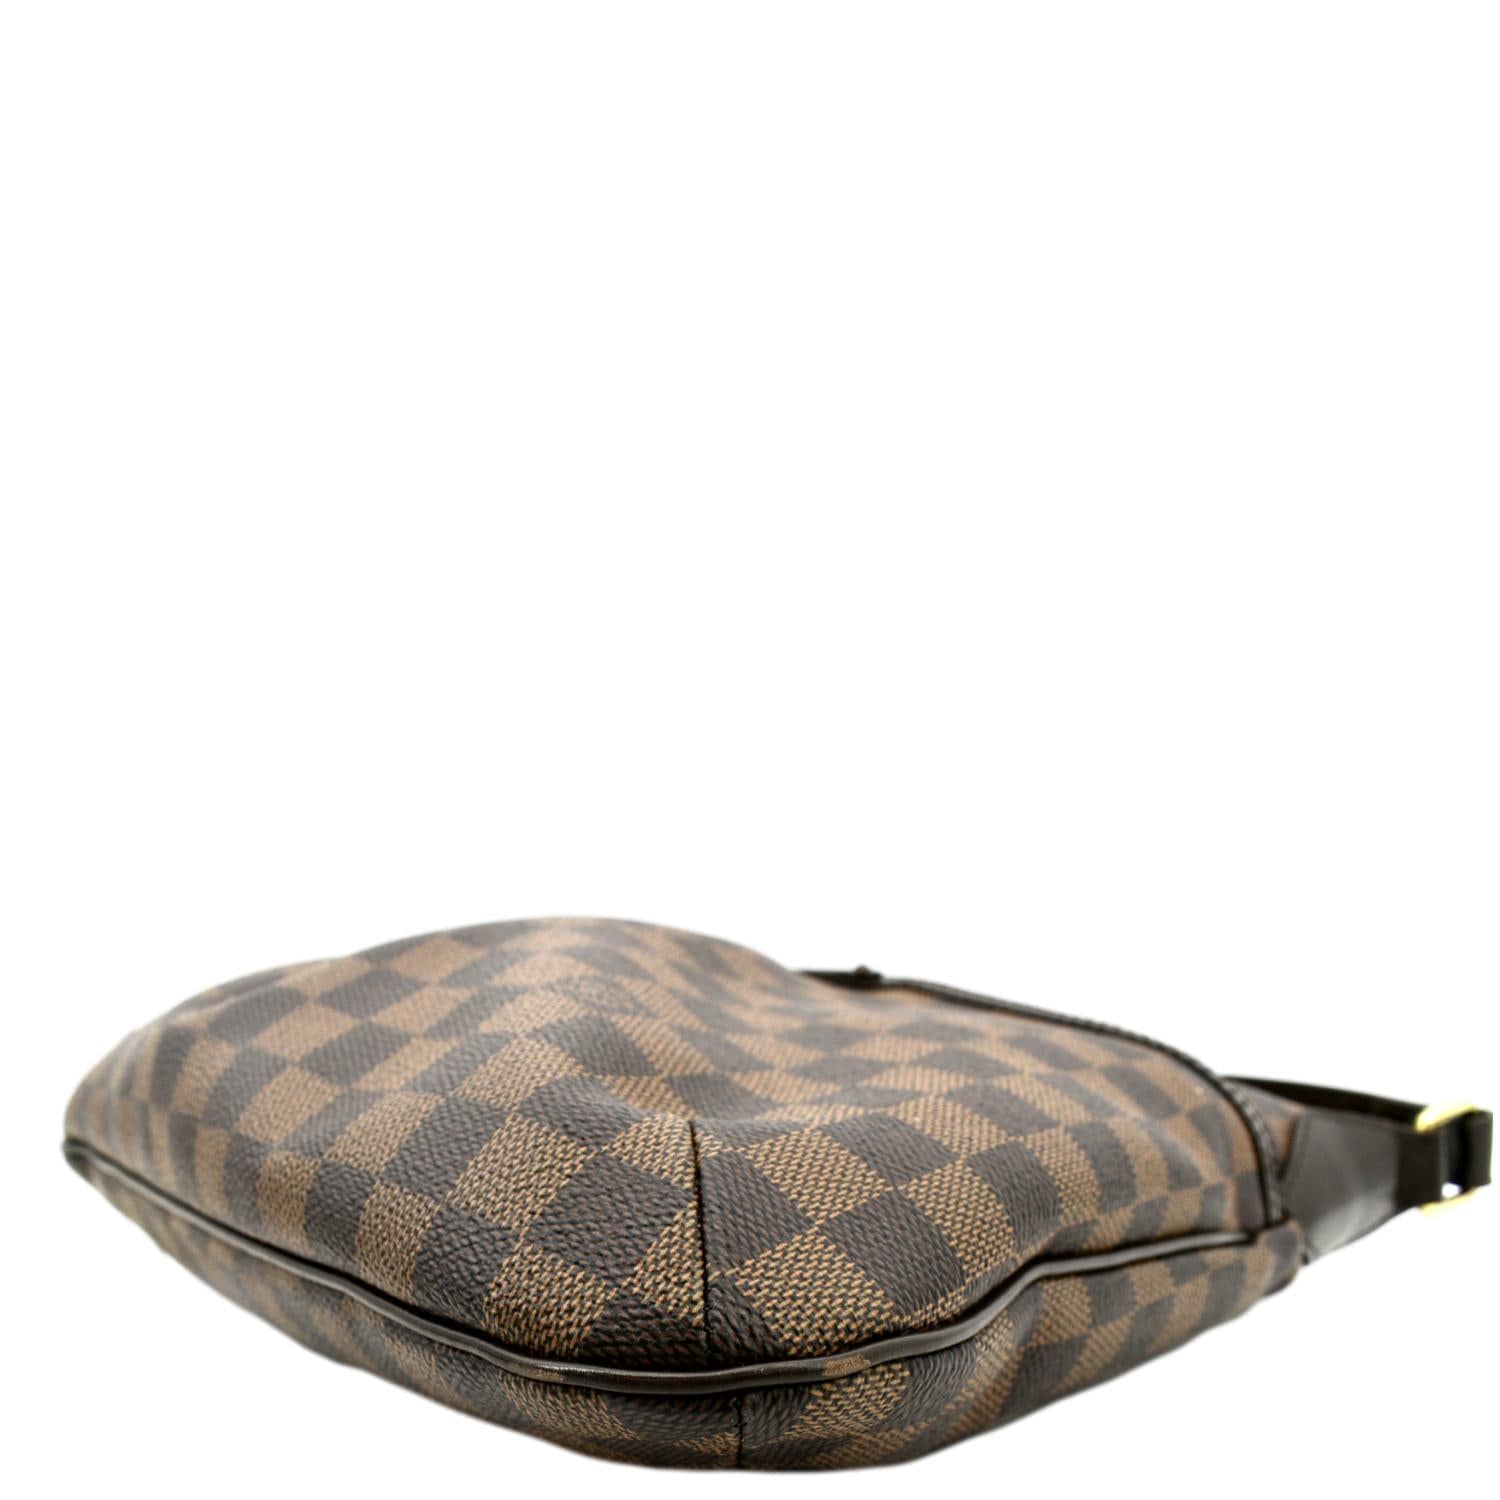 Bloomsbury leather crossbody bag Louis Vuitton Brown in Leather - 31790279